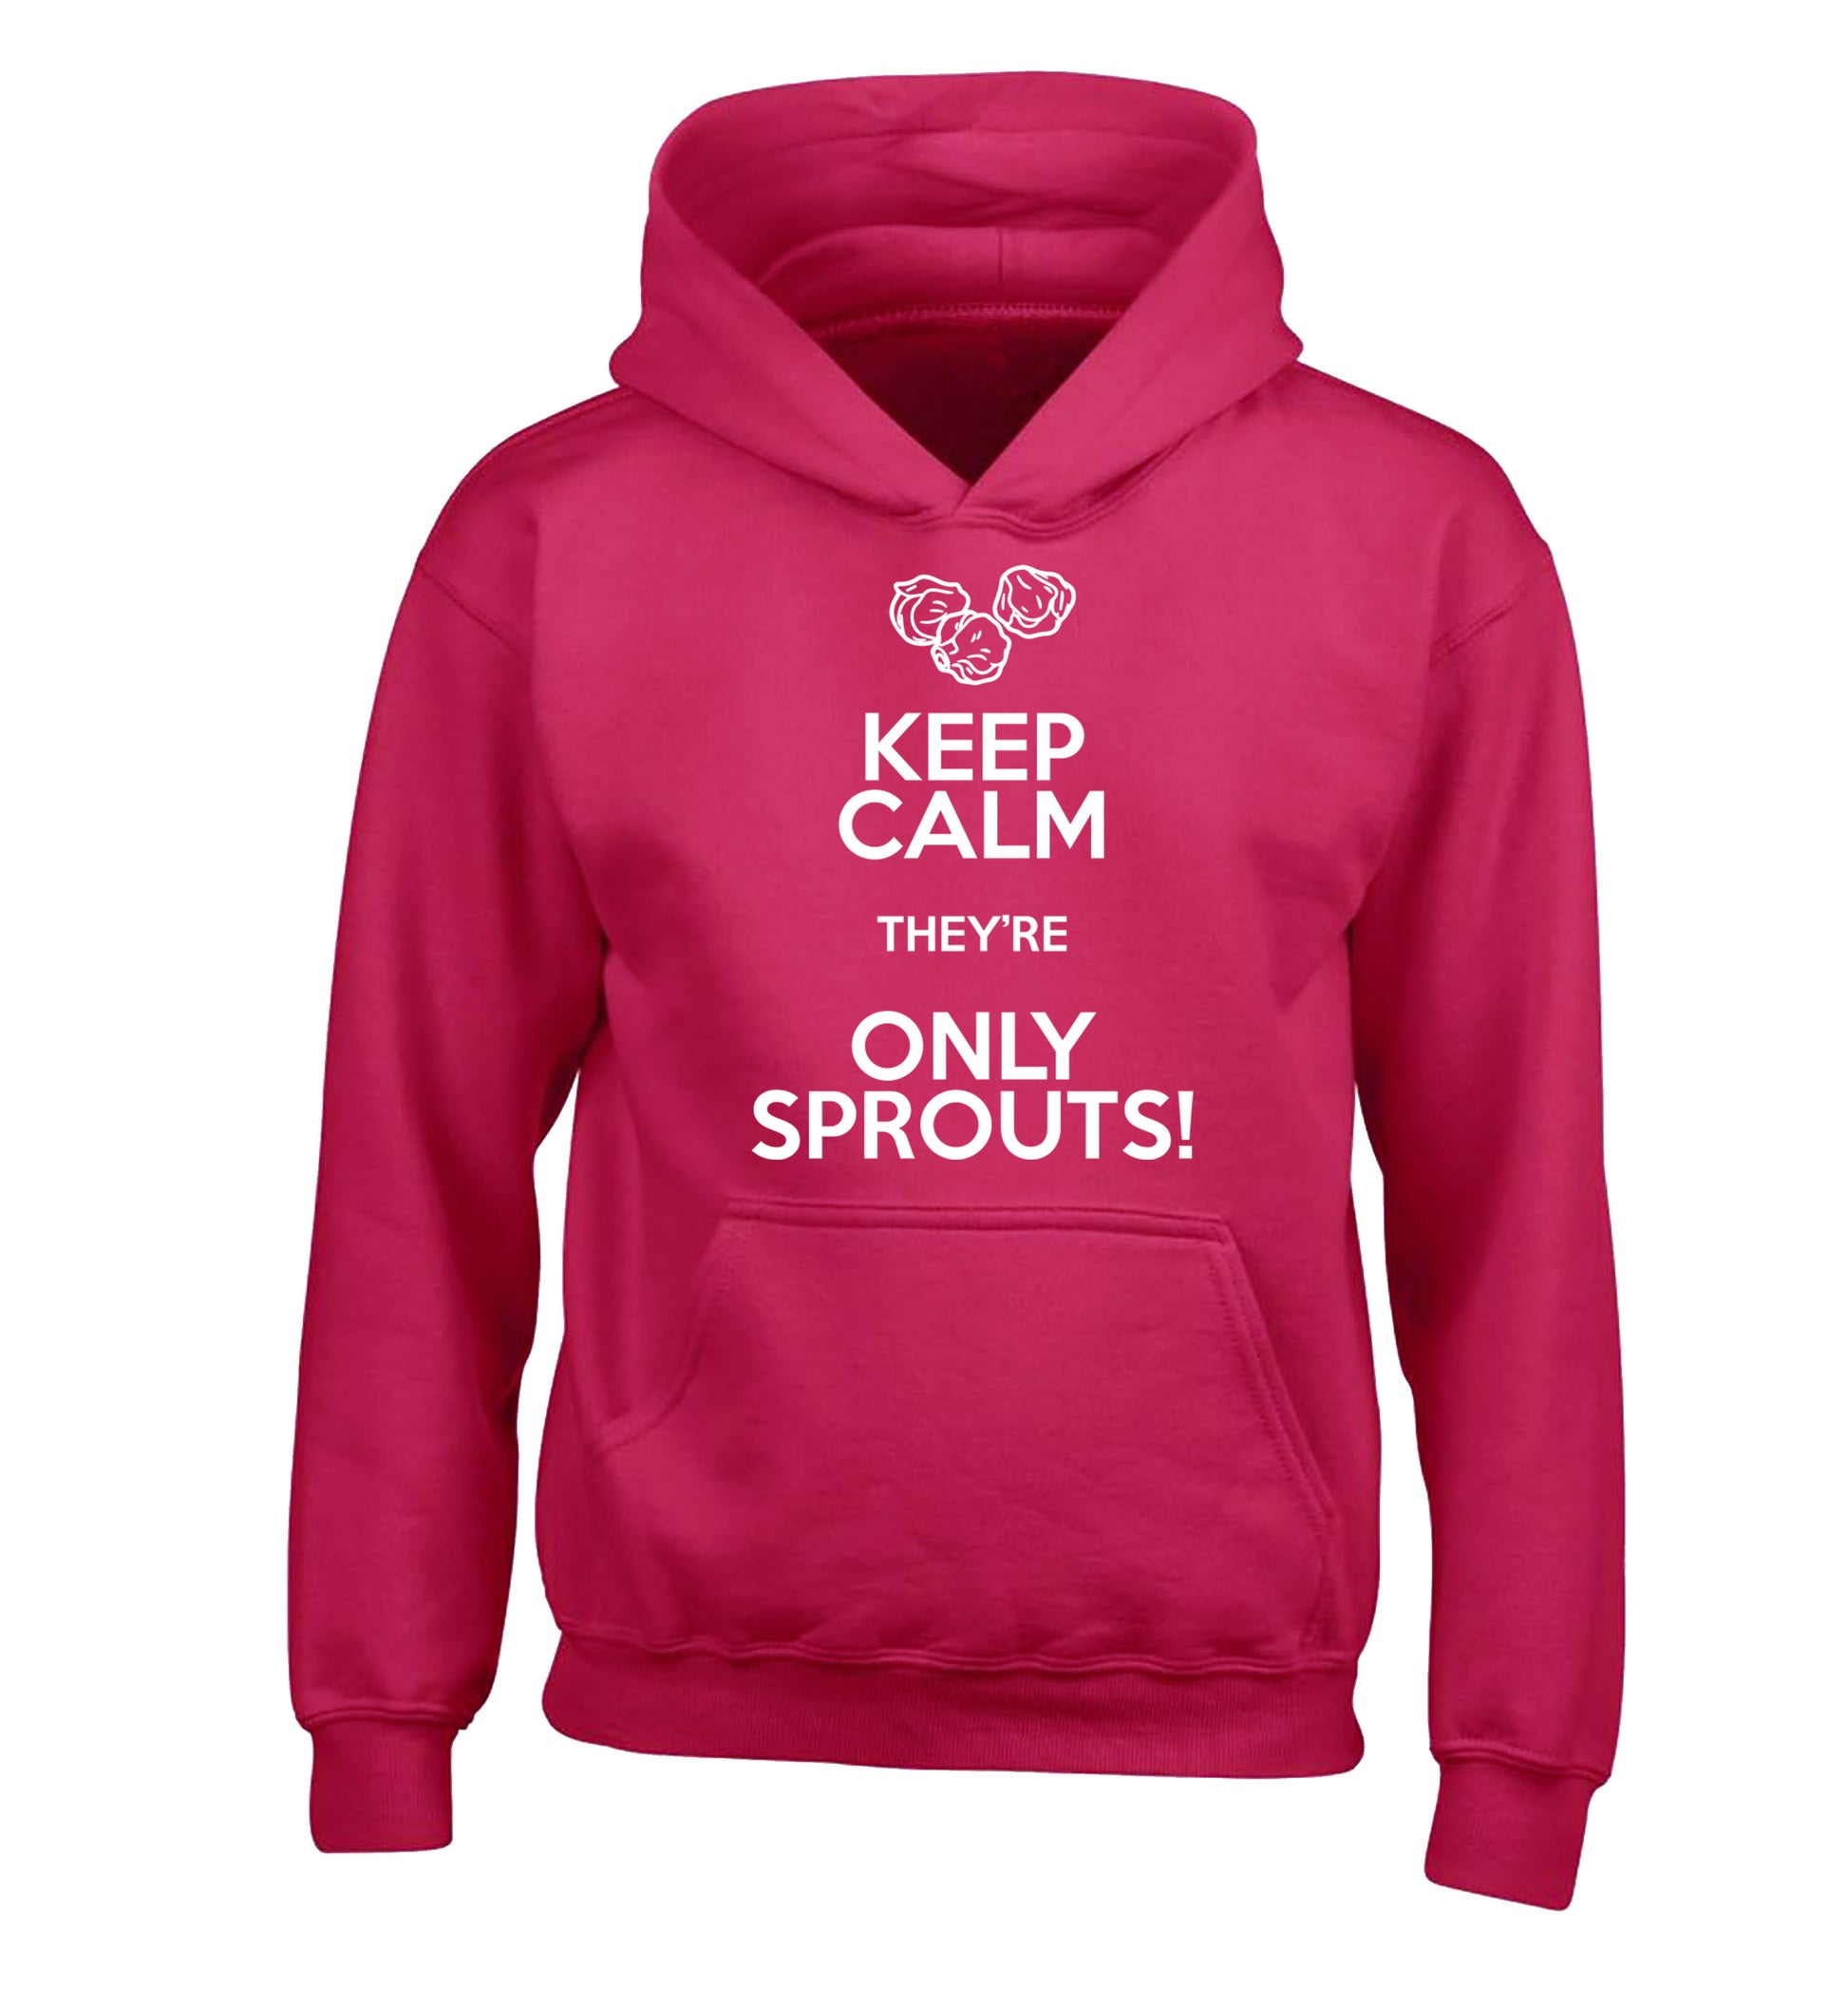 Keep calm they're only sprouts children's pink hoodie 12-13 Years